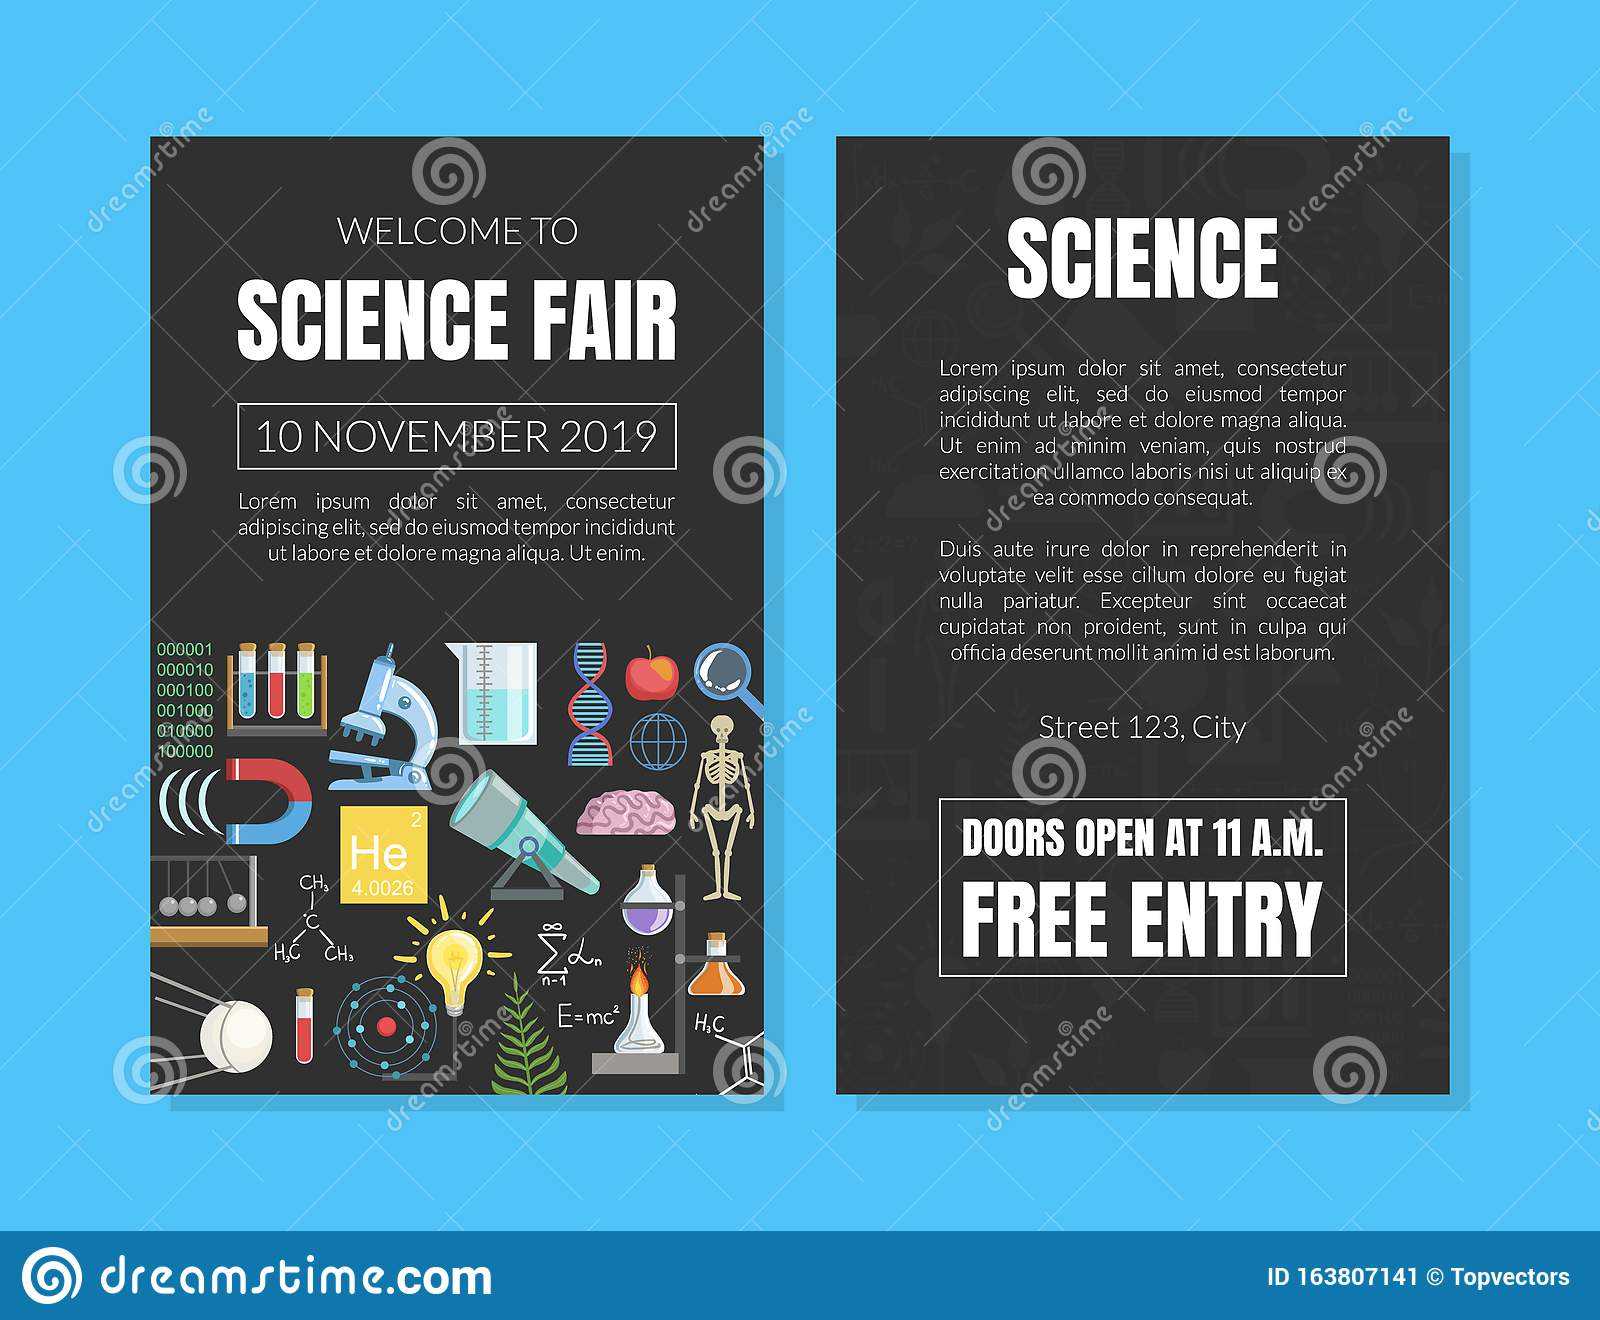 Welcome To Science Fair Invitation Card Template, Scientific In Science Fair Banner Template